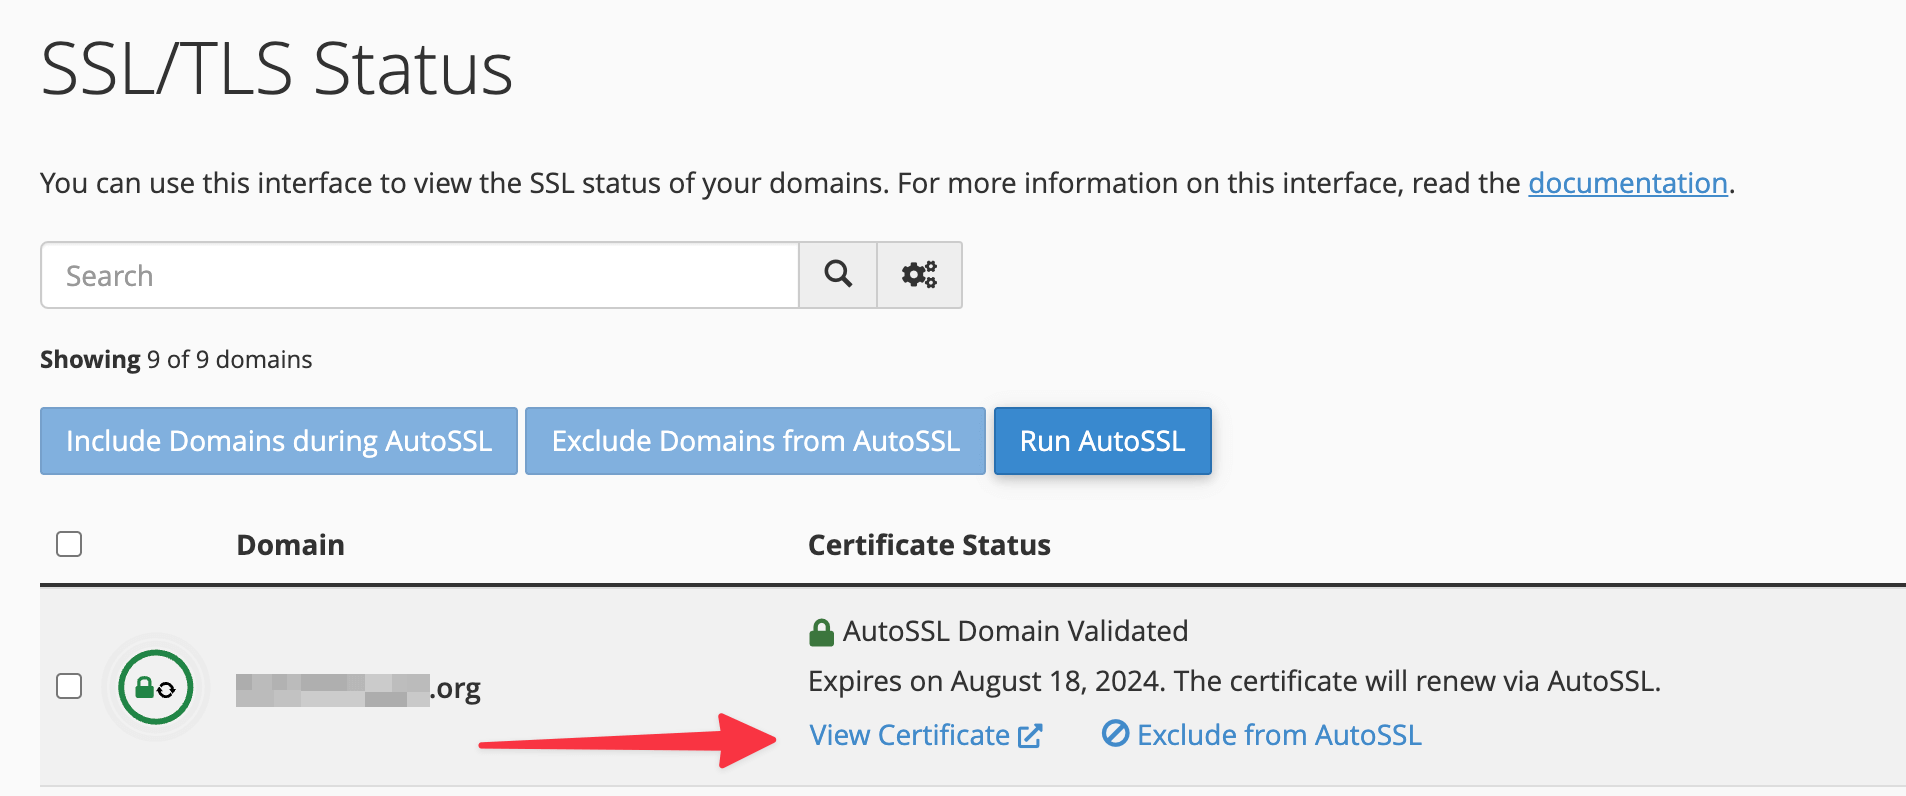 View Certificate in cPanel